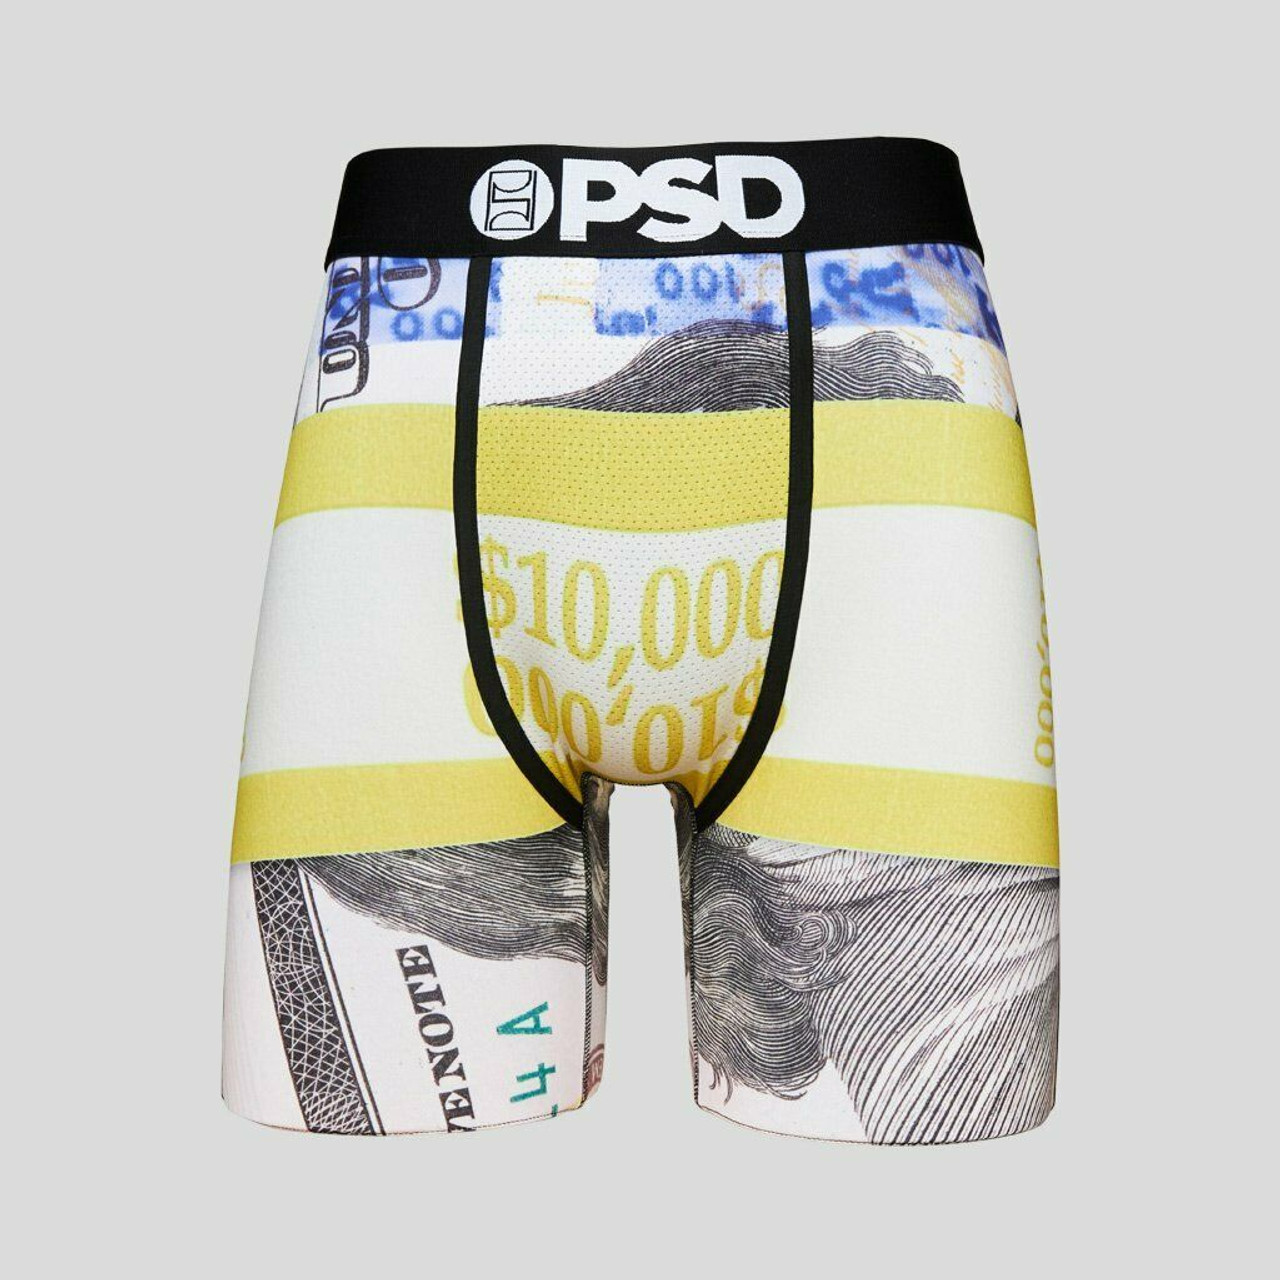 PSD Big Bands Money Hundreds Dollars Athletic Boxers Briefs